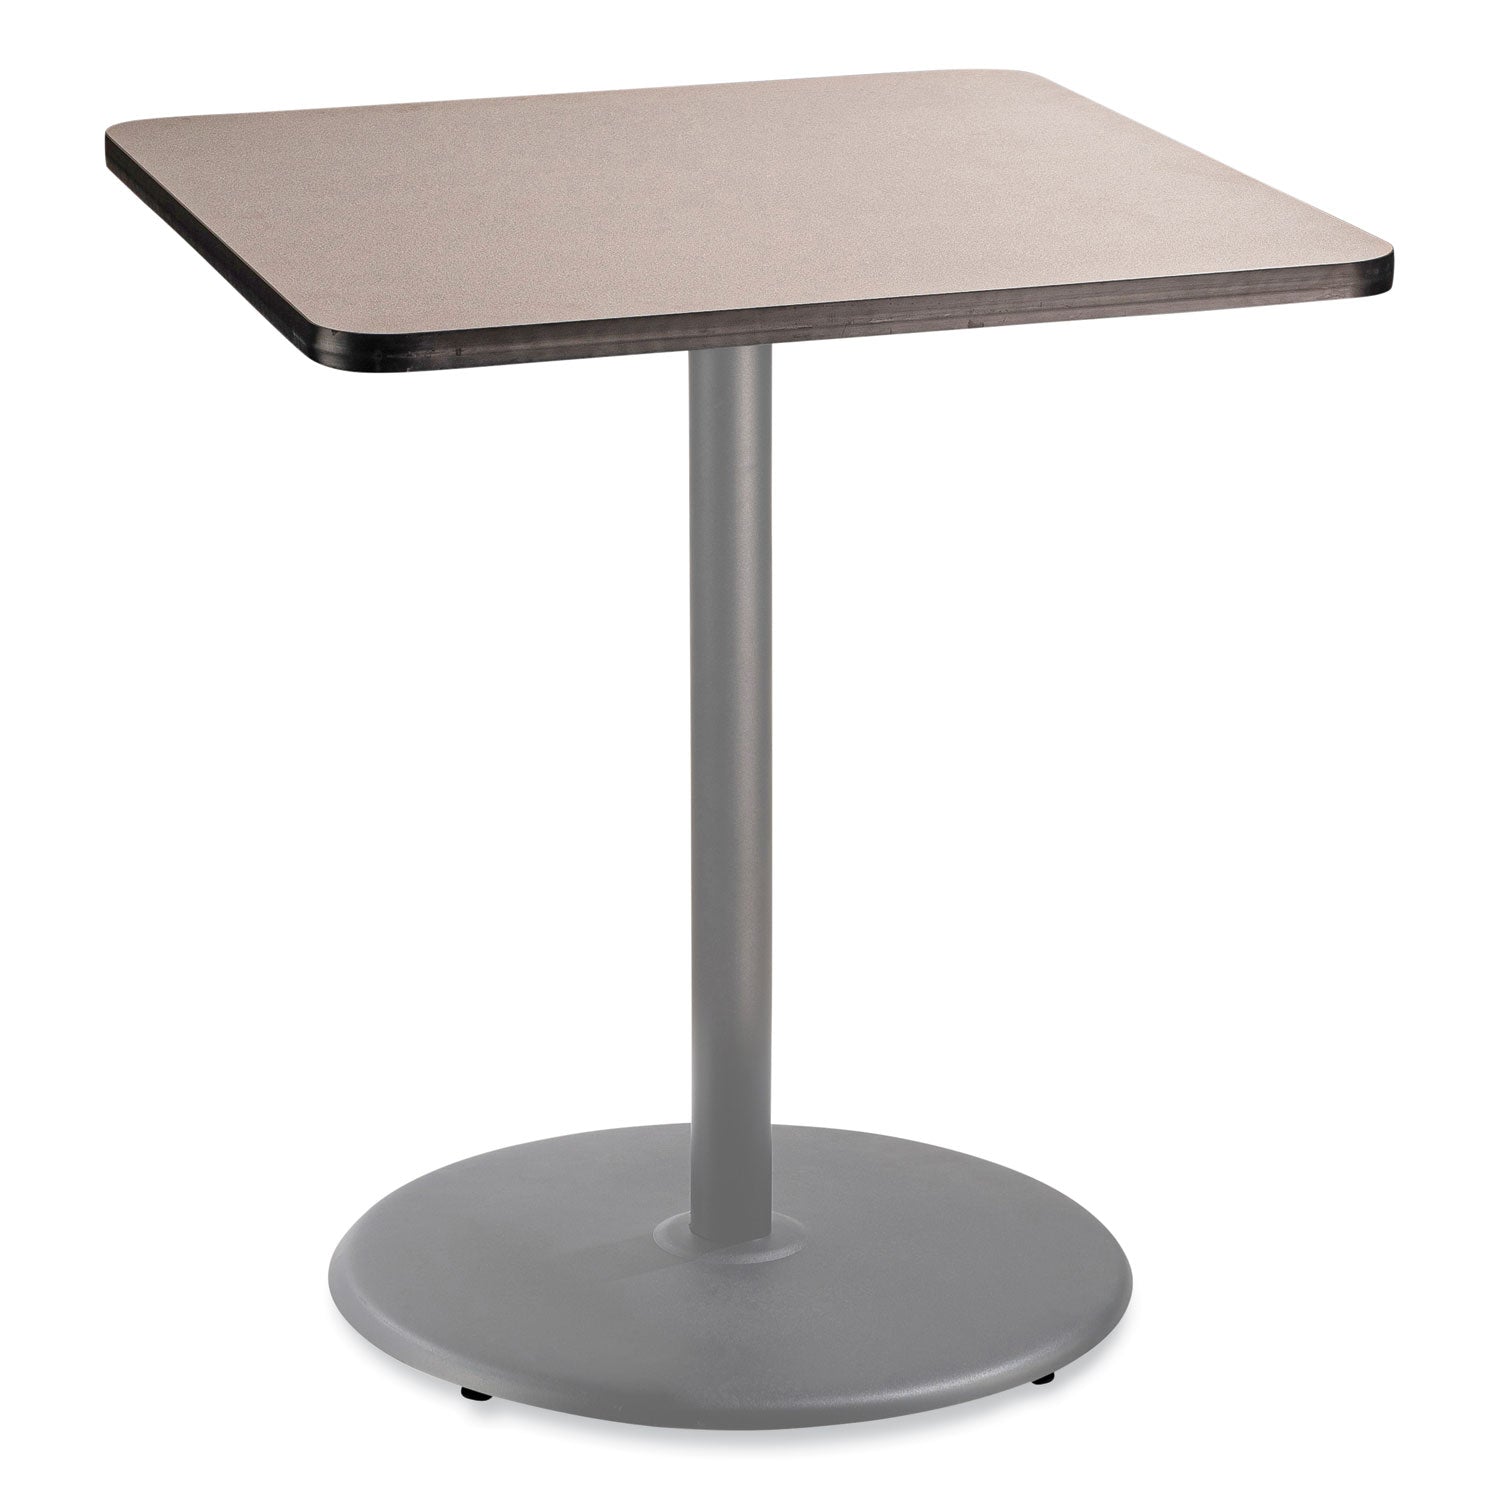 cafe-table-36w-x-36d-x-42h-square-top-round-base-gray-nebula-top-gray-base-ships-in-7-10-business-days_npscg33636rb1gy - 1